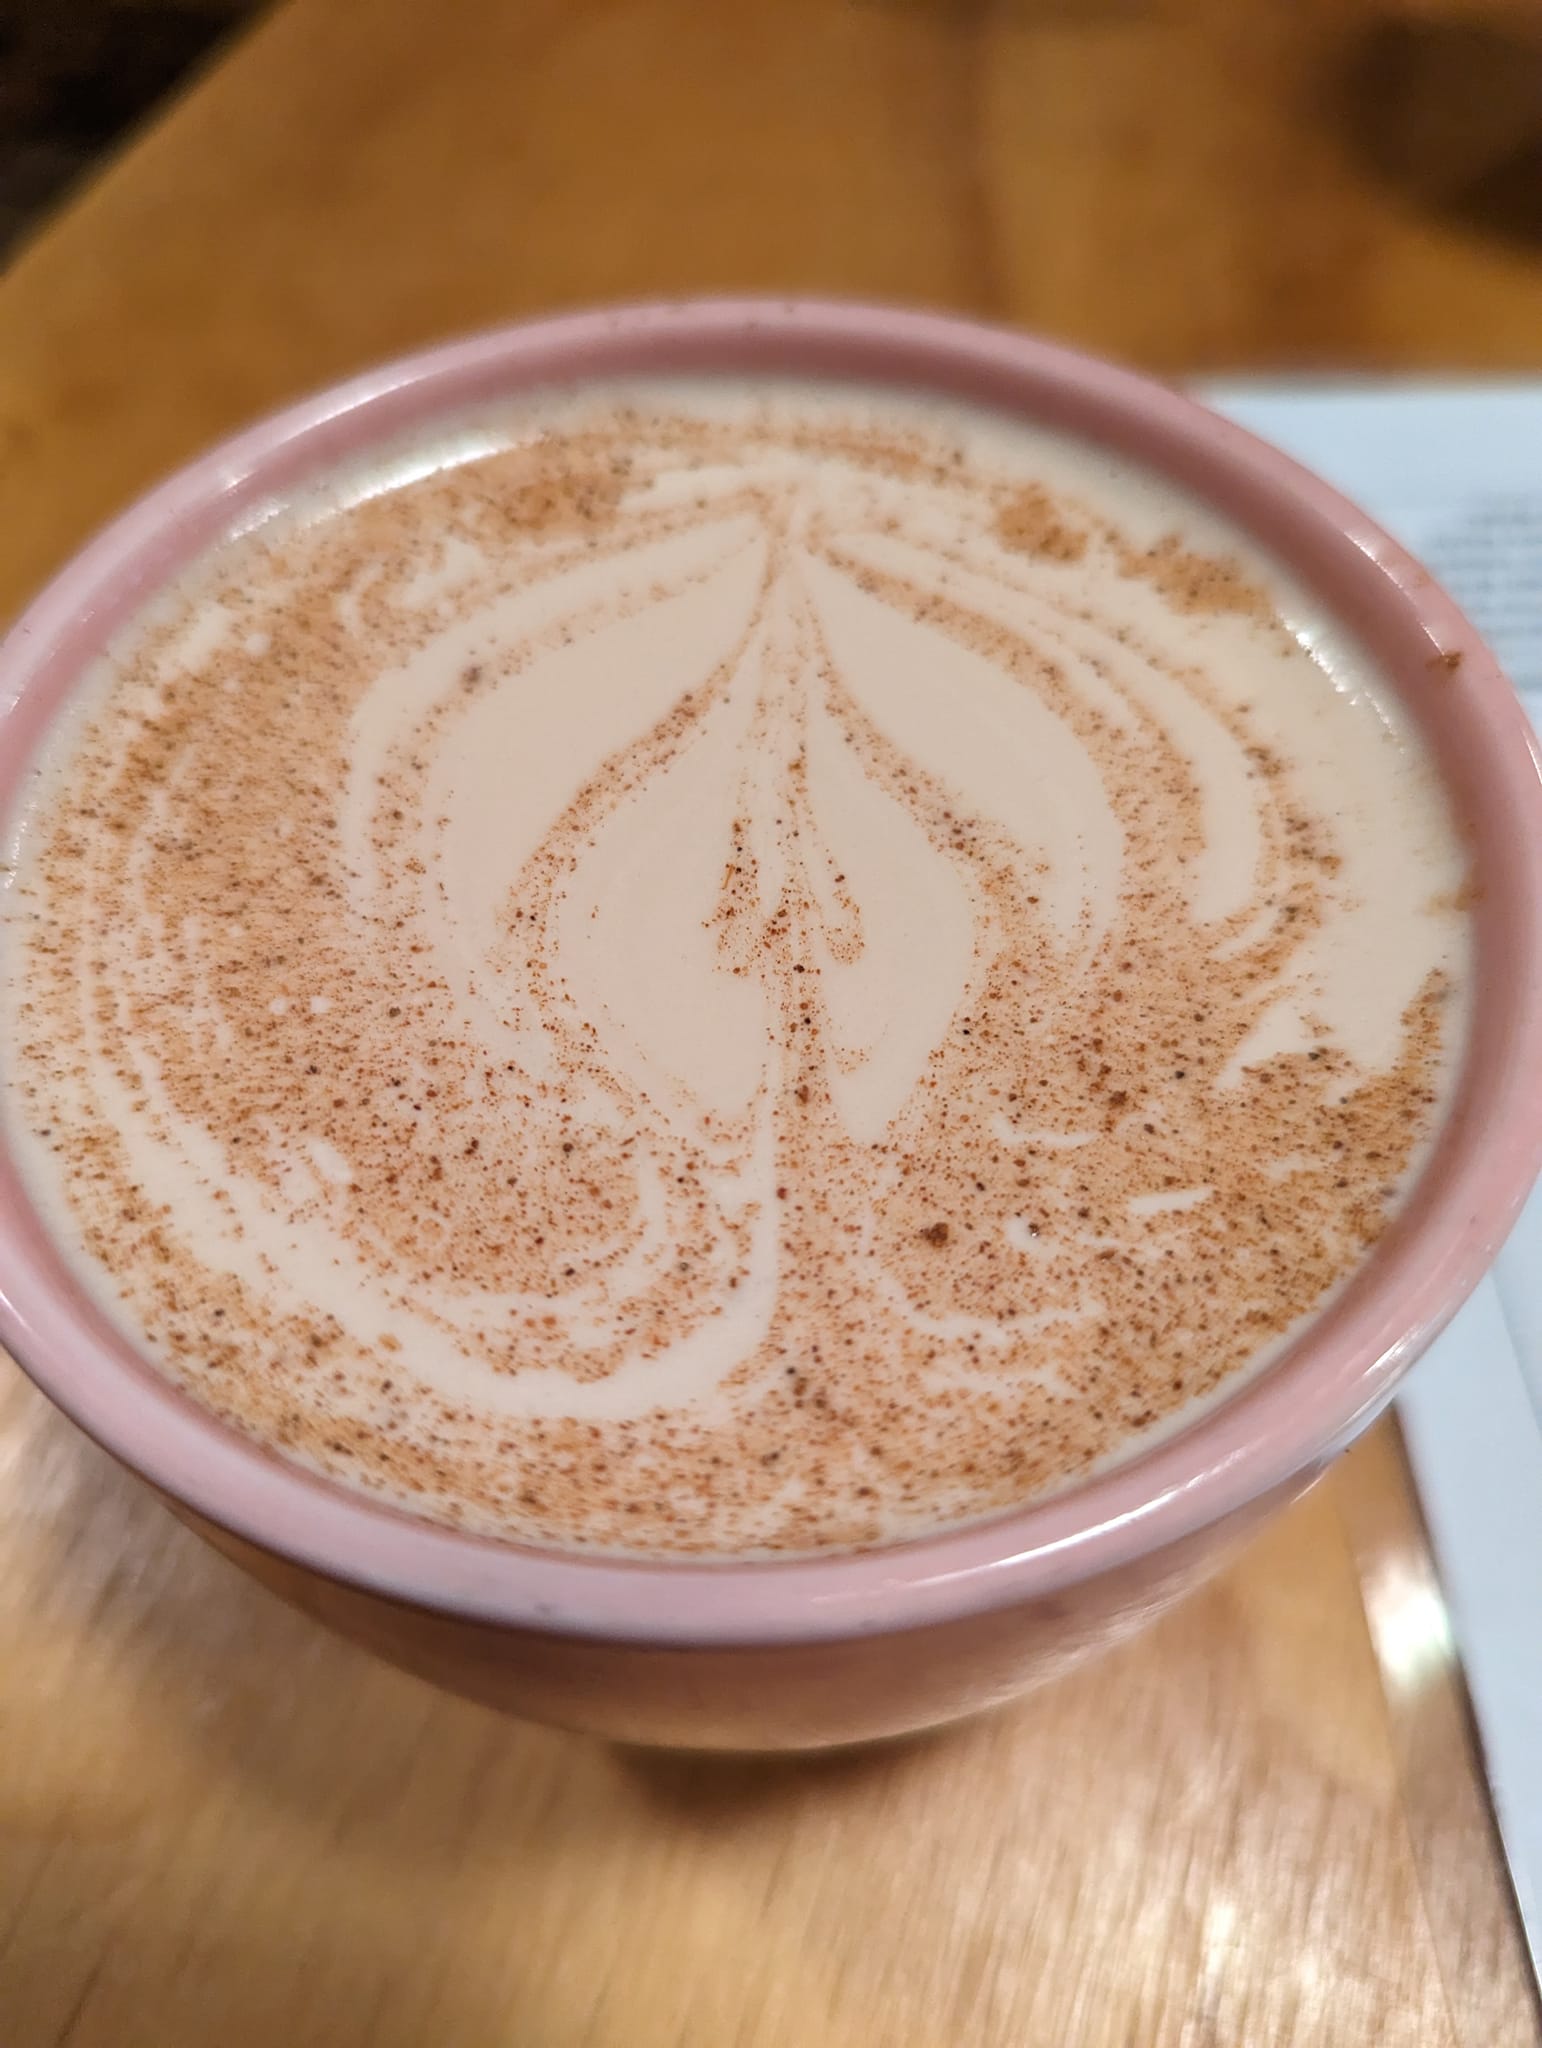 Chai tea latte from the Greenhouse in Biloxi, not far from downtown Ocean Springs, Mississippi.